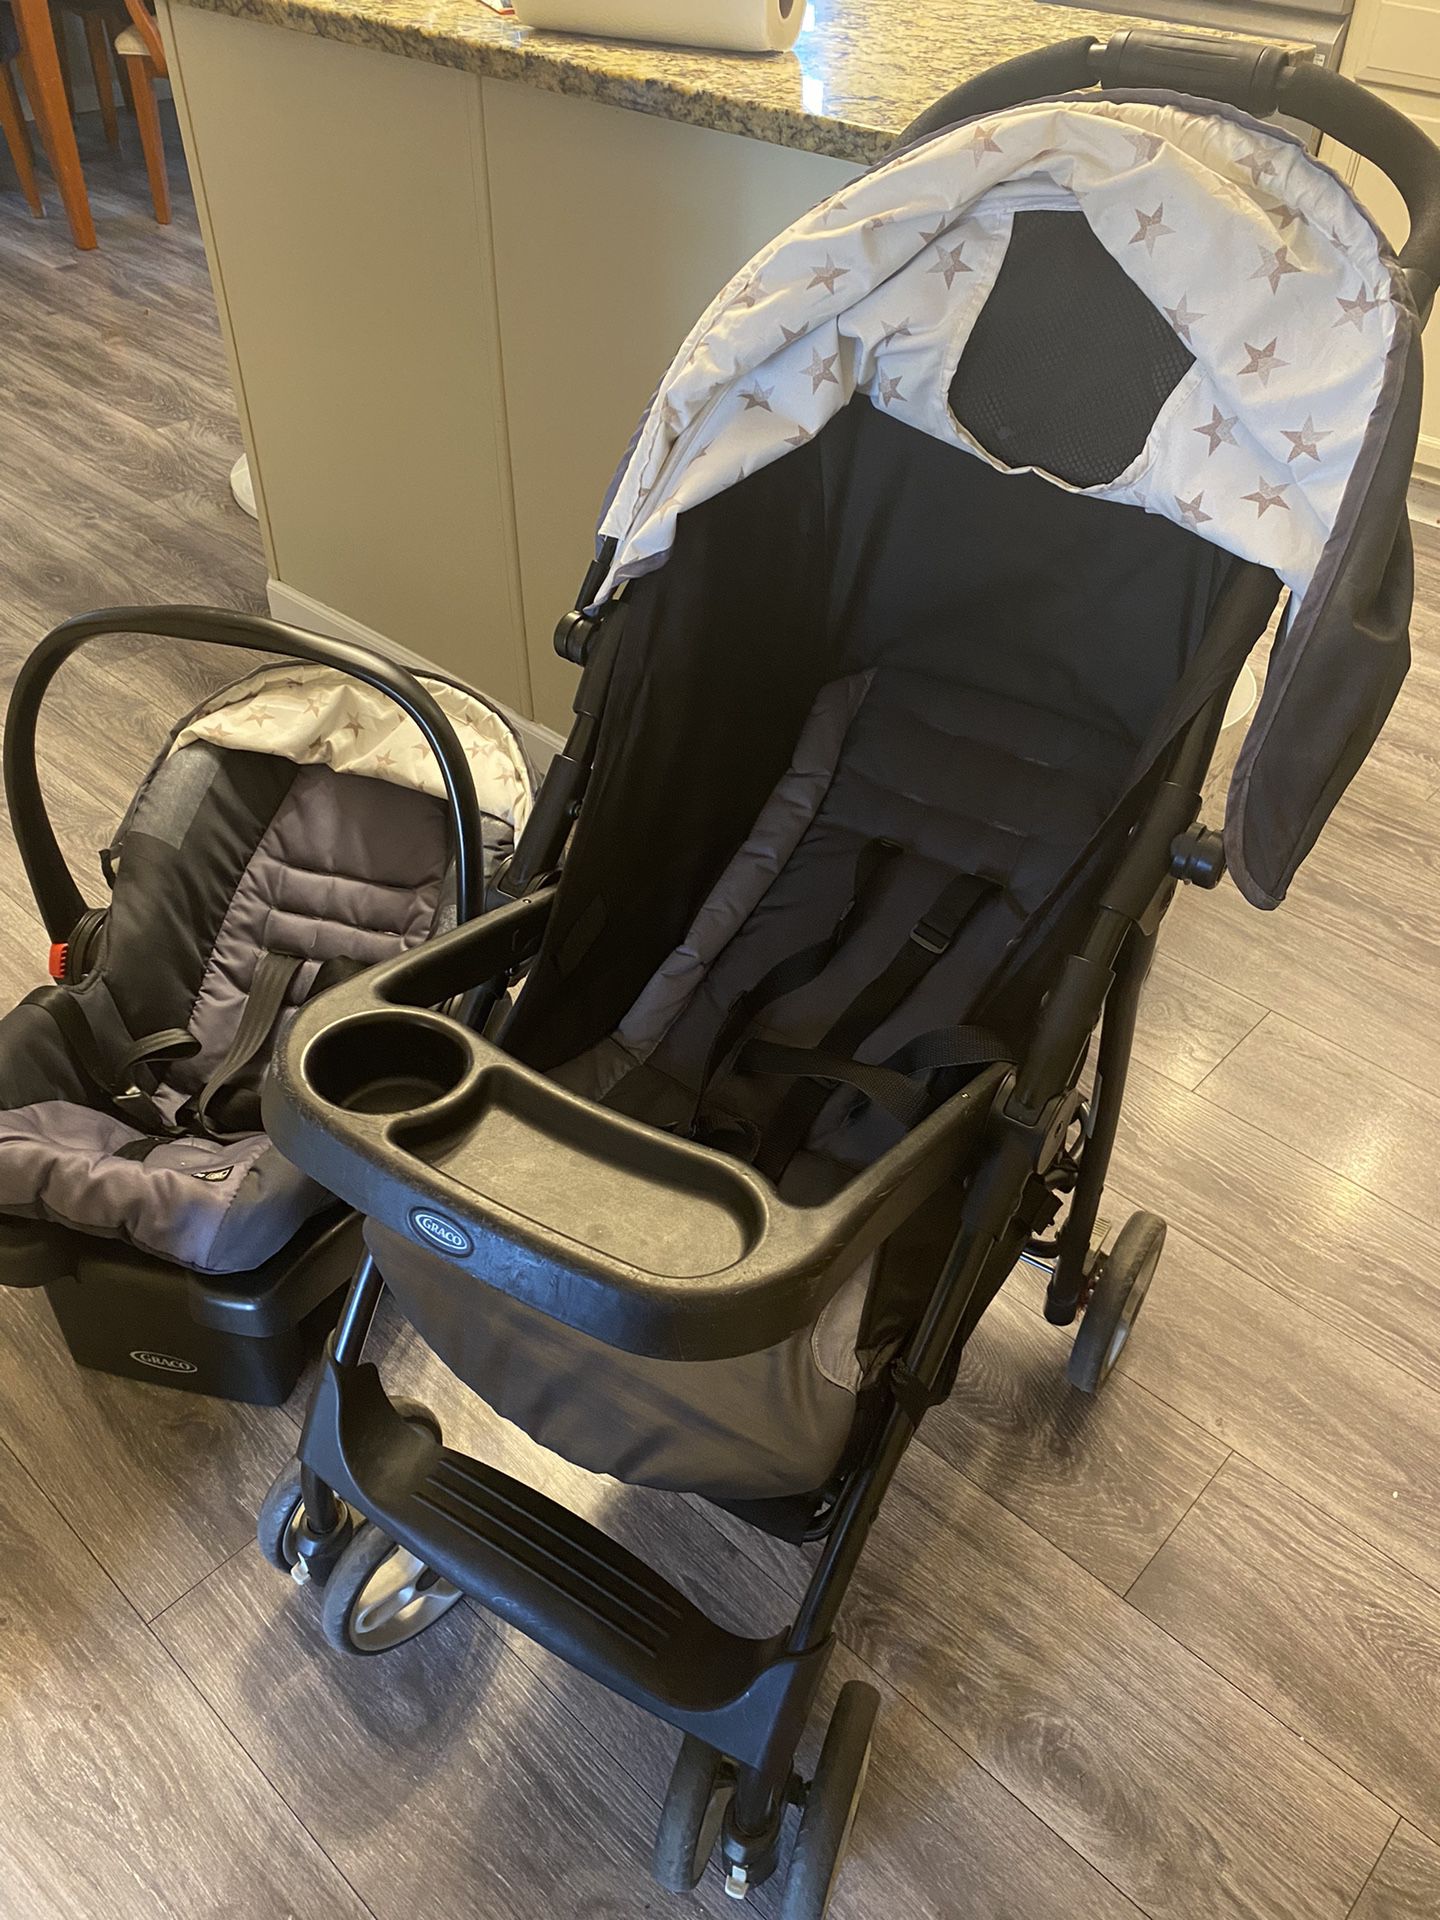 stroller and Car seat Set.